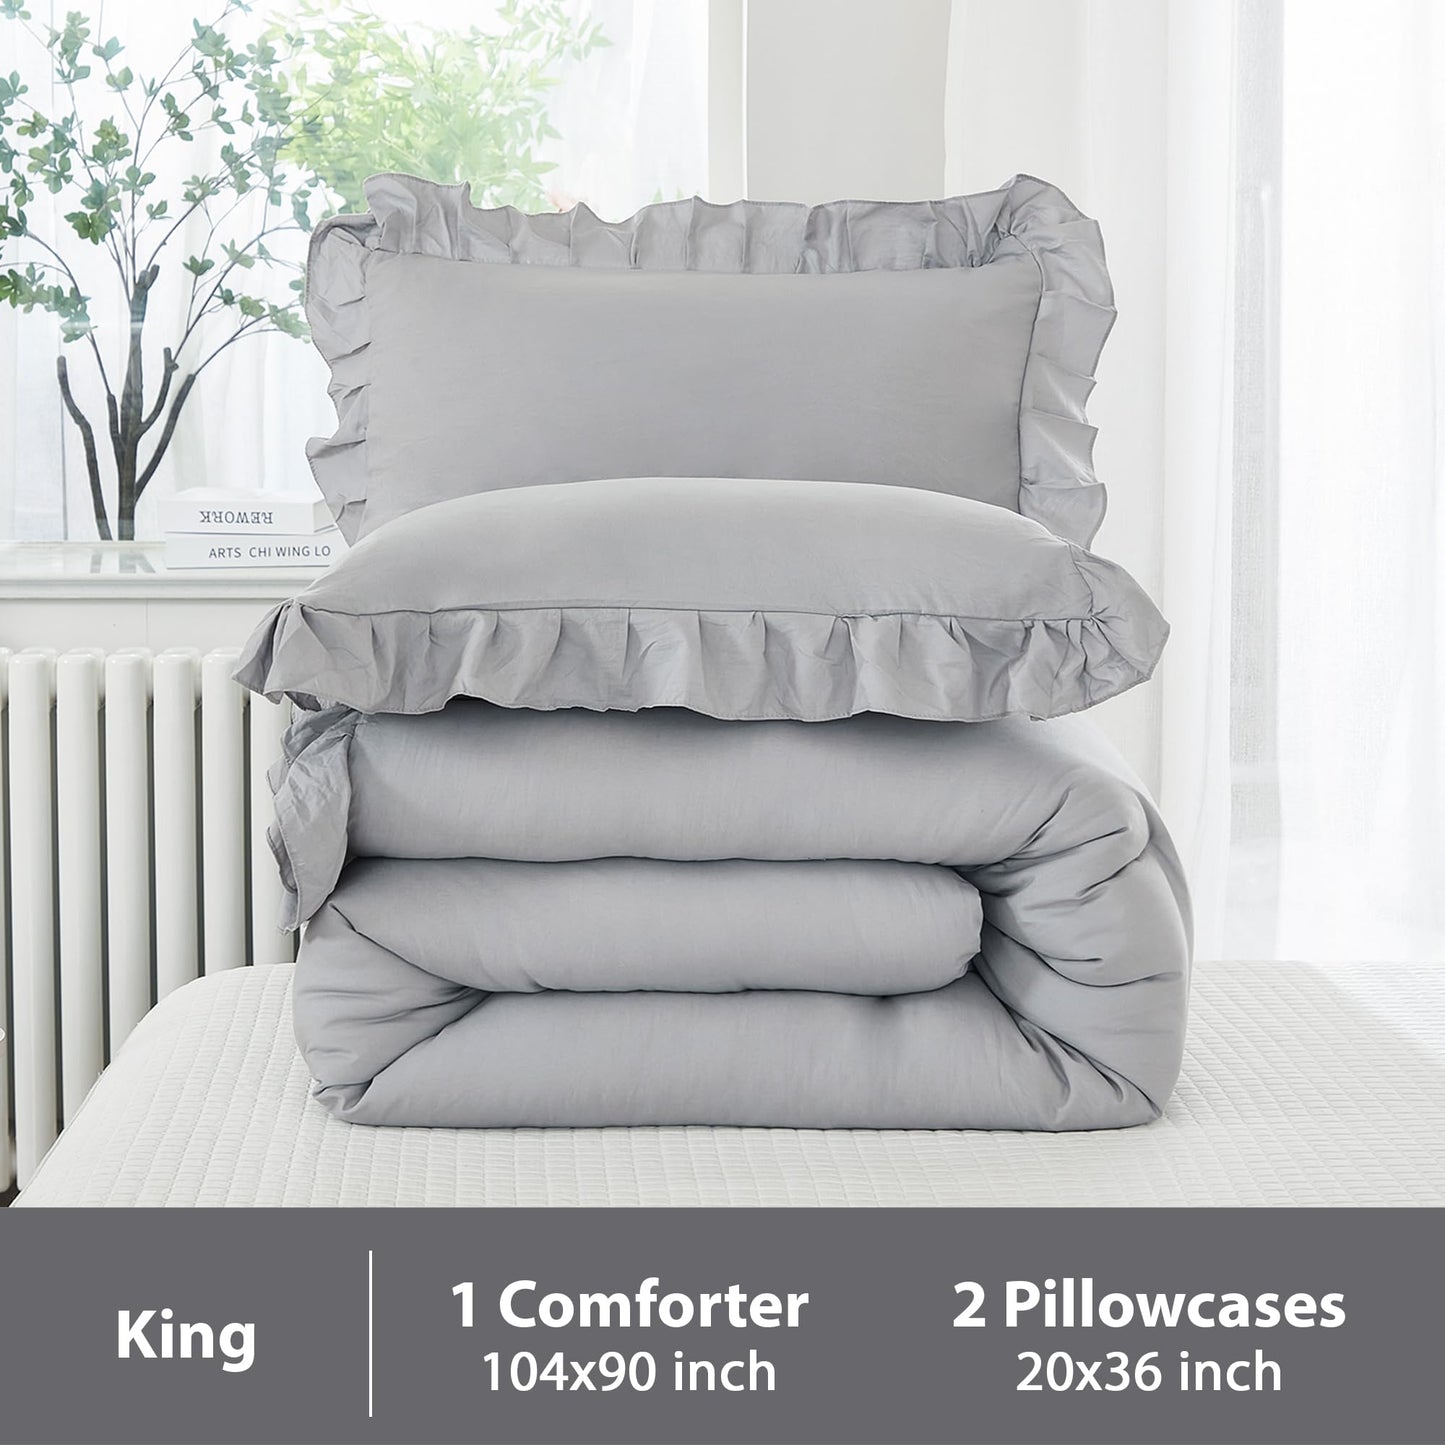 Andency Silver Gray Comforter Set King, 3 Pieces Farmhouse Shabby Chic Ruffle Comforter, Lightweight Fluffy Soft Microfiber All Season Solid Bed Comforter Set (1 Ruffle Comforter & 2 Pillowcases)